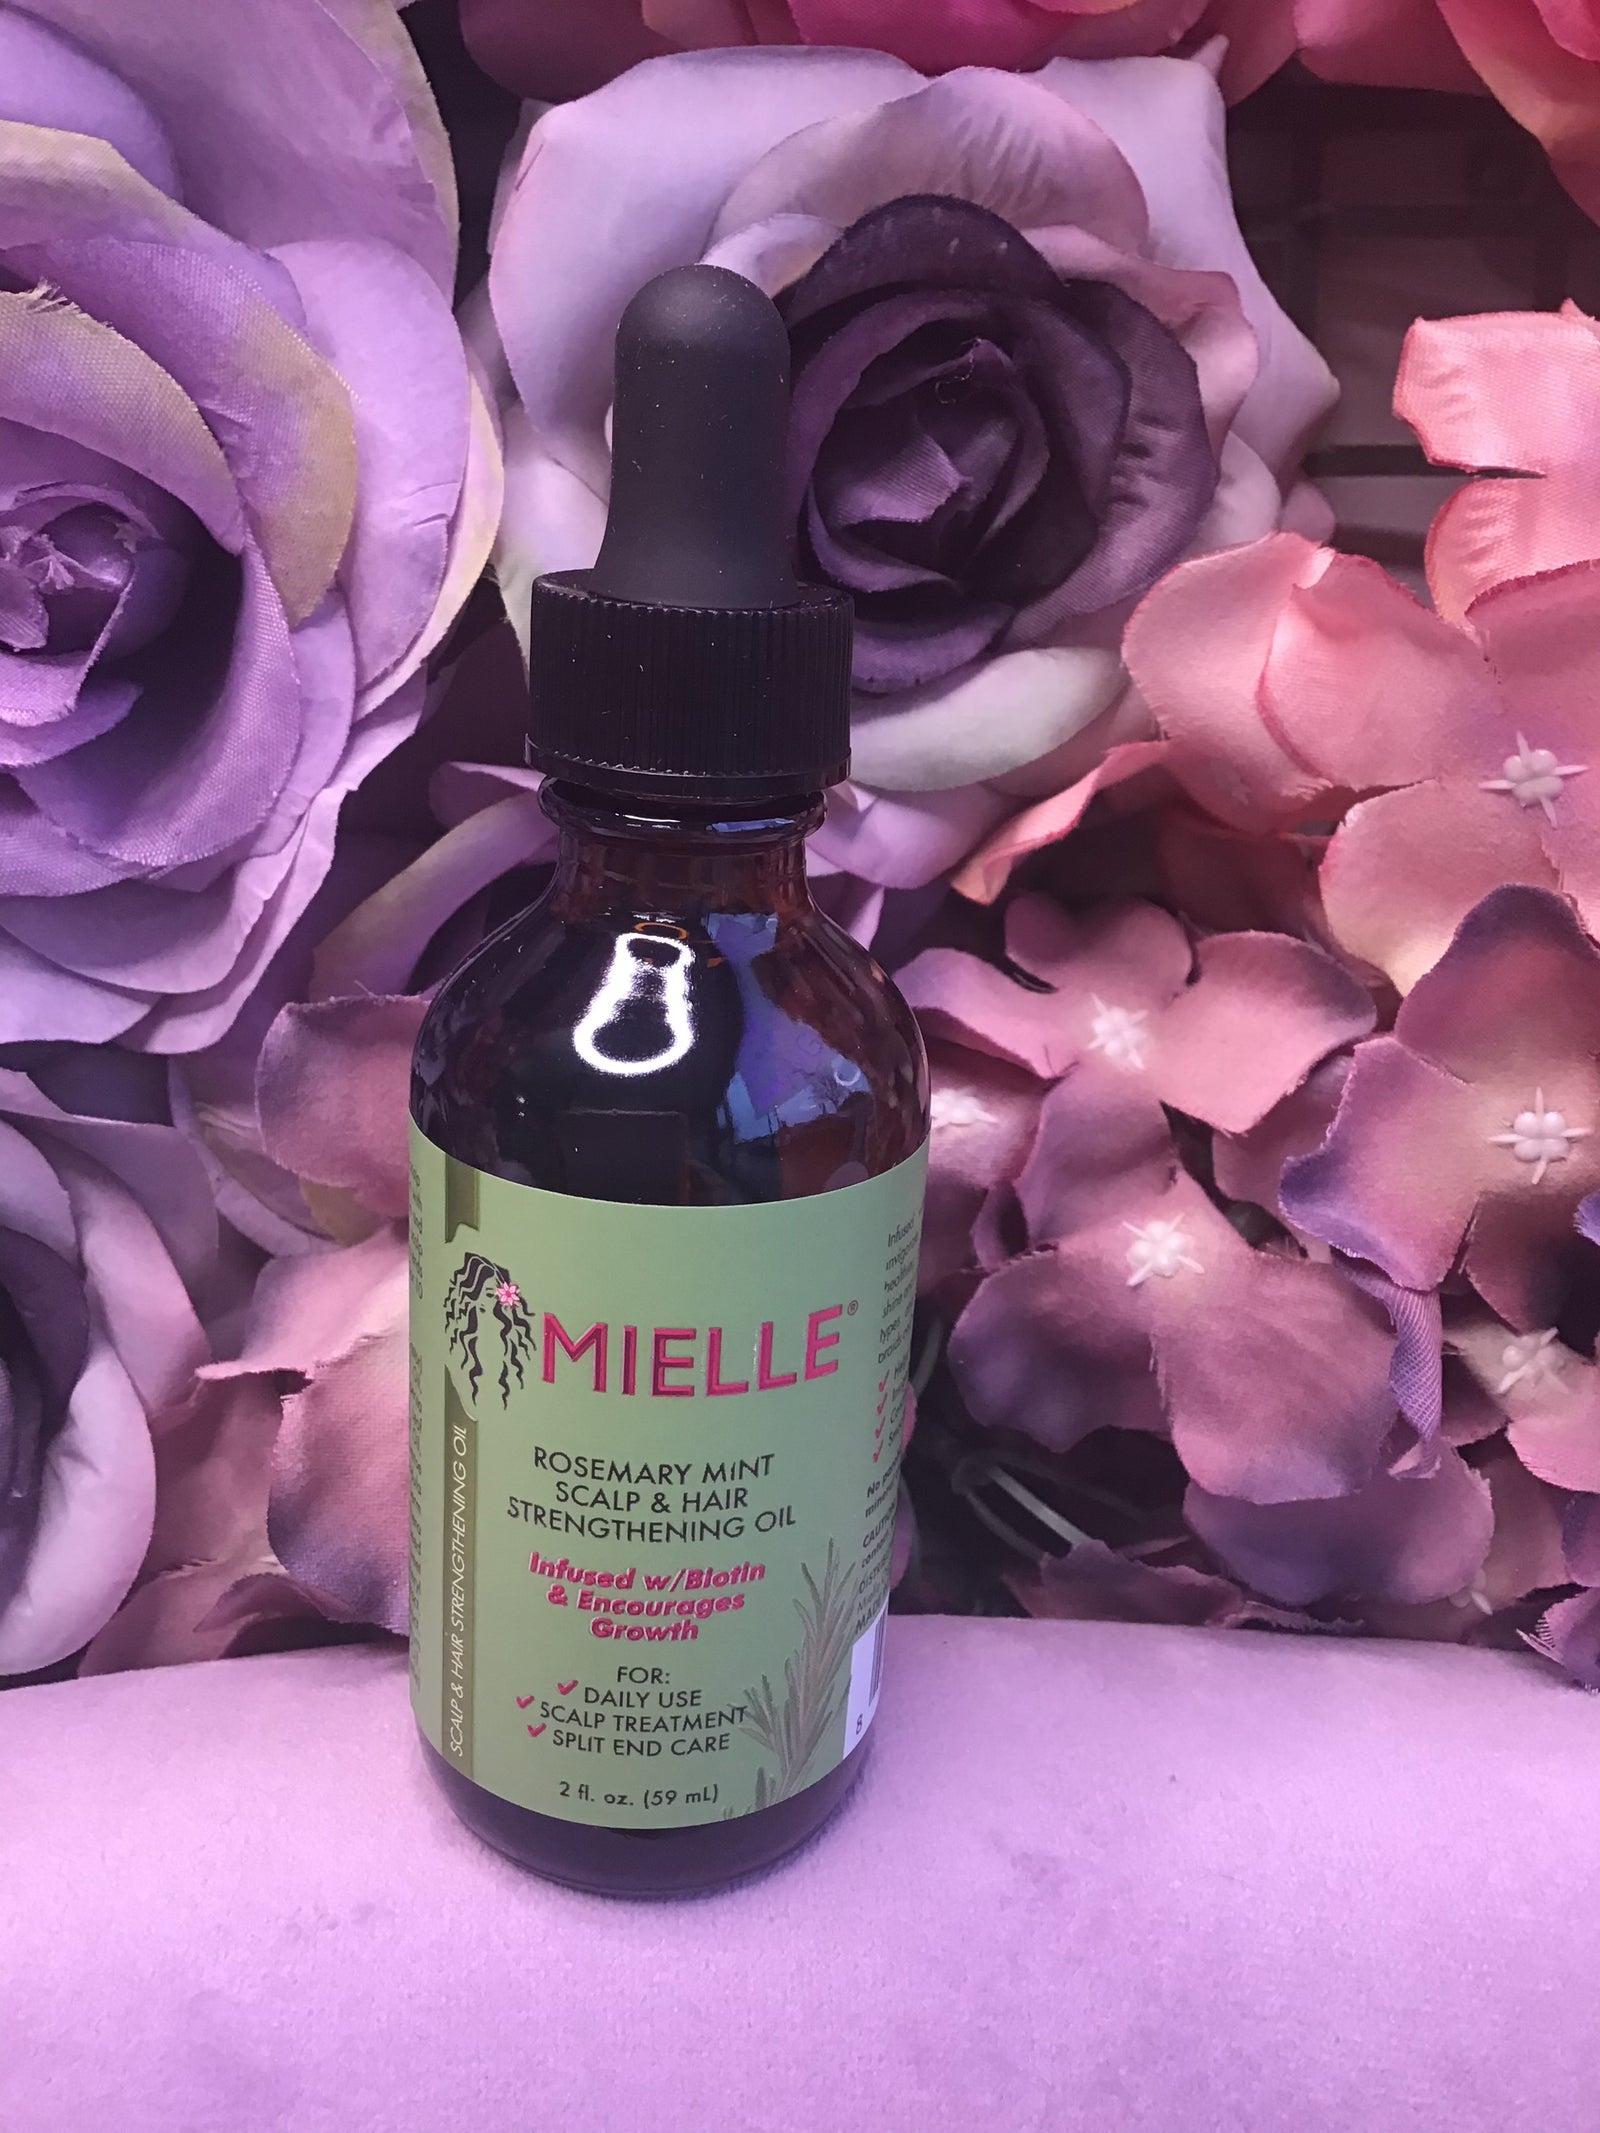 Mielle Organics Hair & Scalp Strengthening Oil Made in USA with